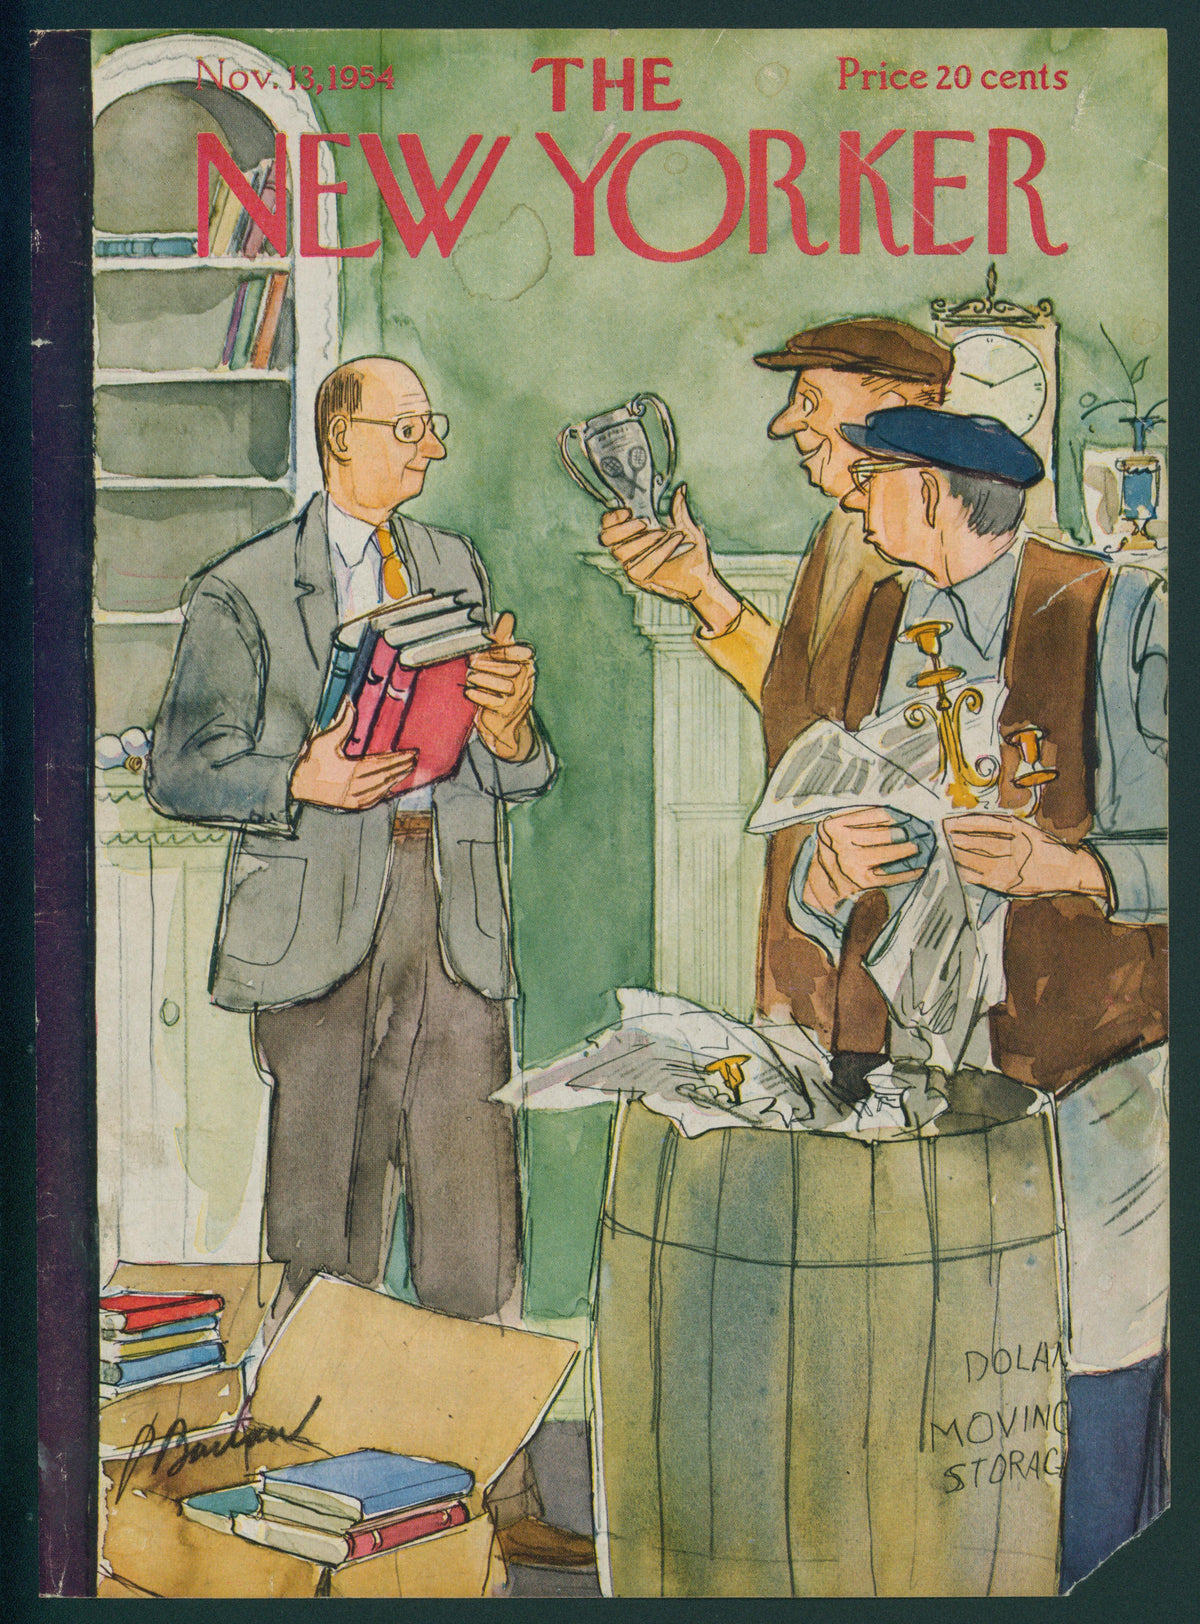 Moving Day- The New Yorker - Authentic Vintage Antique Print